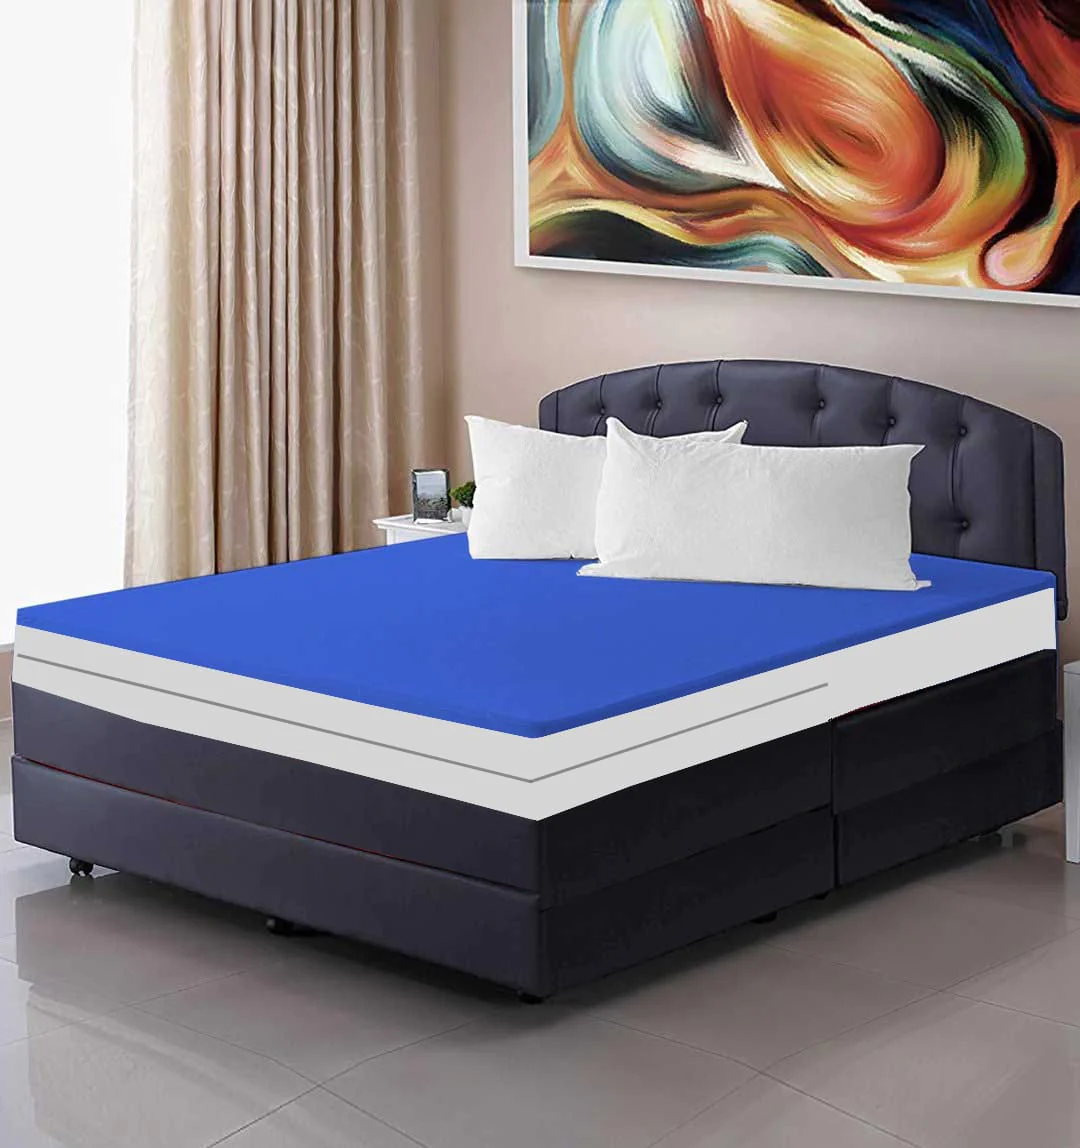 Double Sided Zipper Water Proof Mattress Cover - Blue